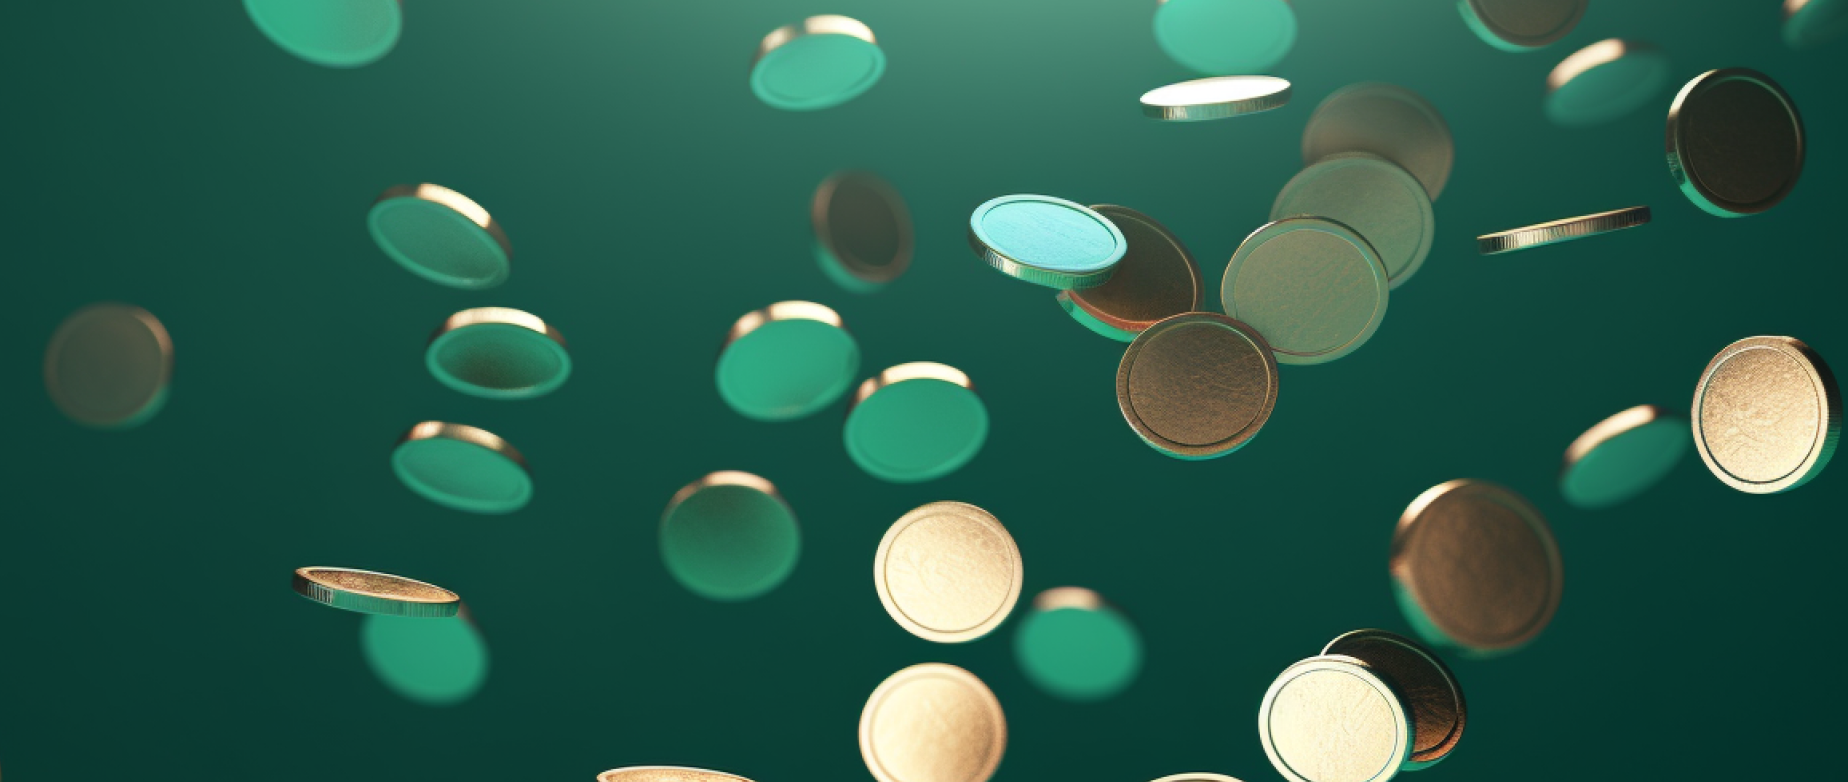 gold coins suspended in the air: equity crowdfunding